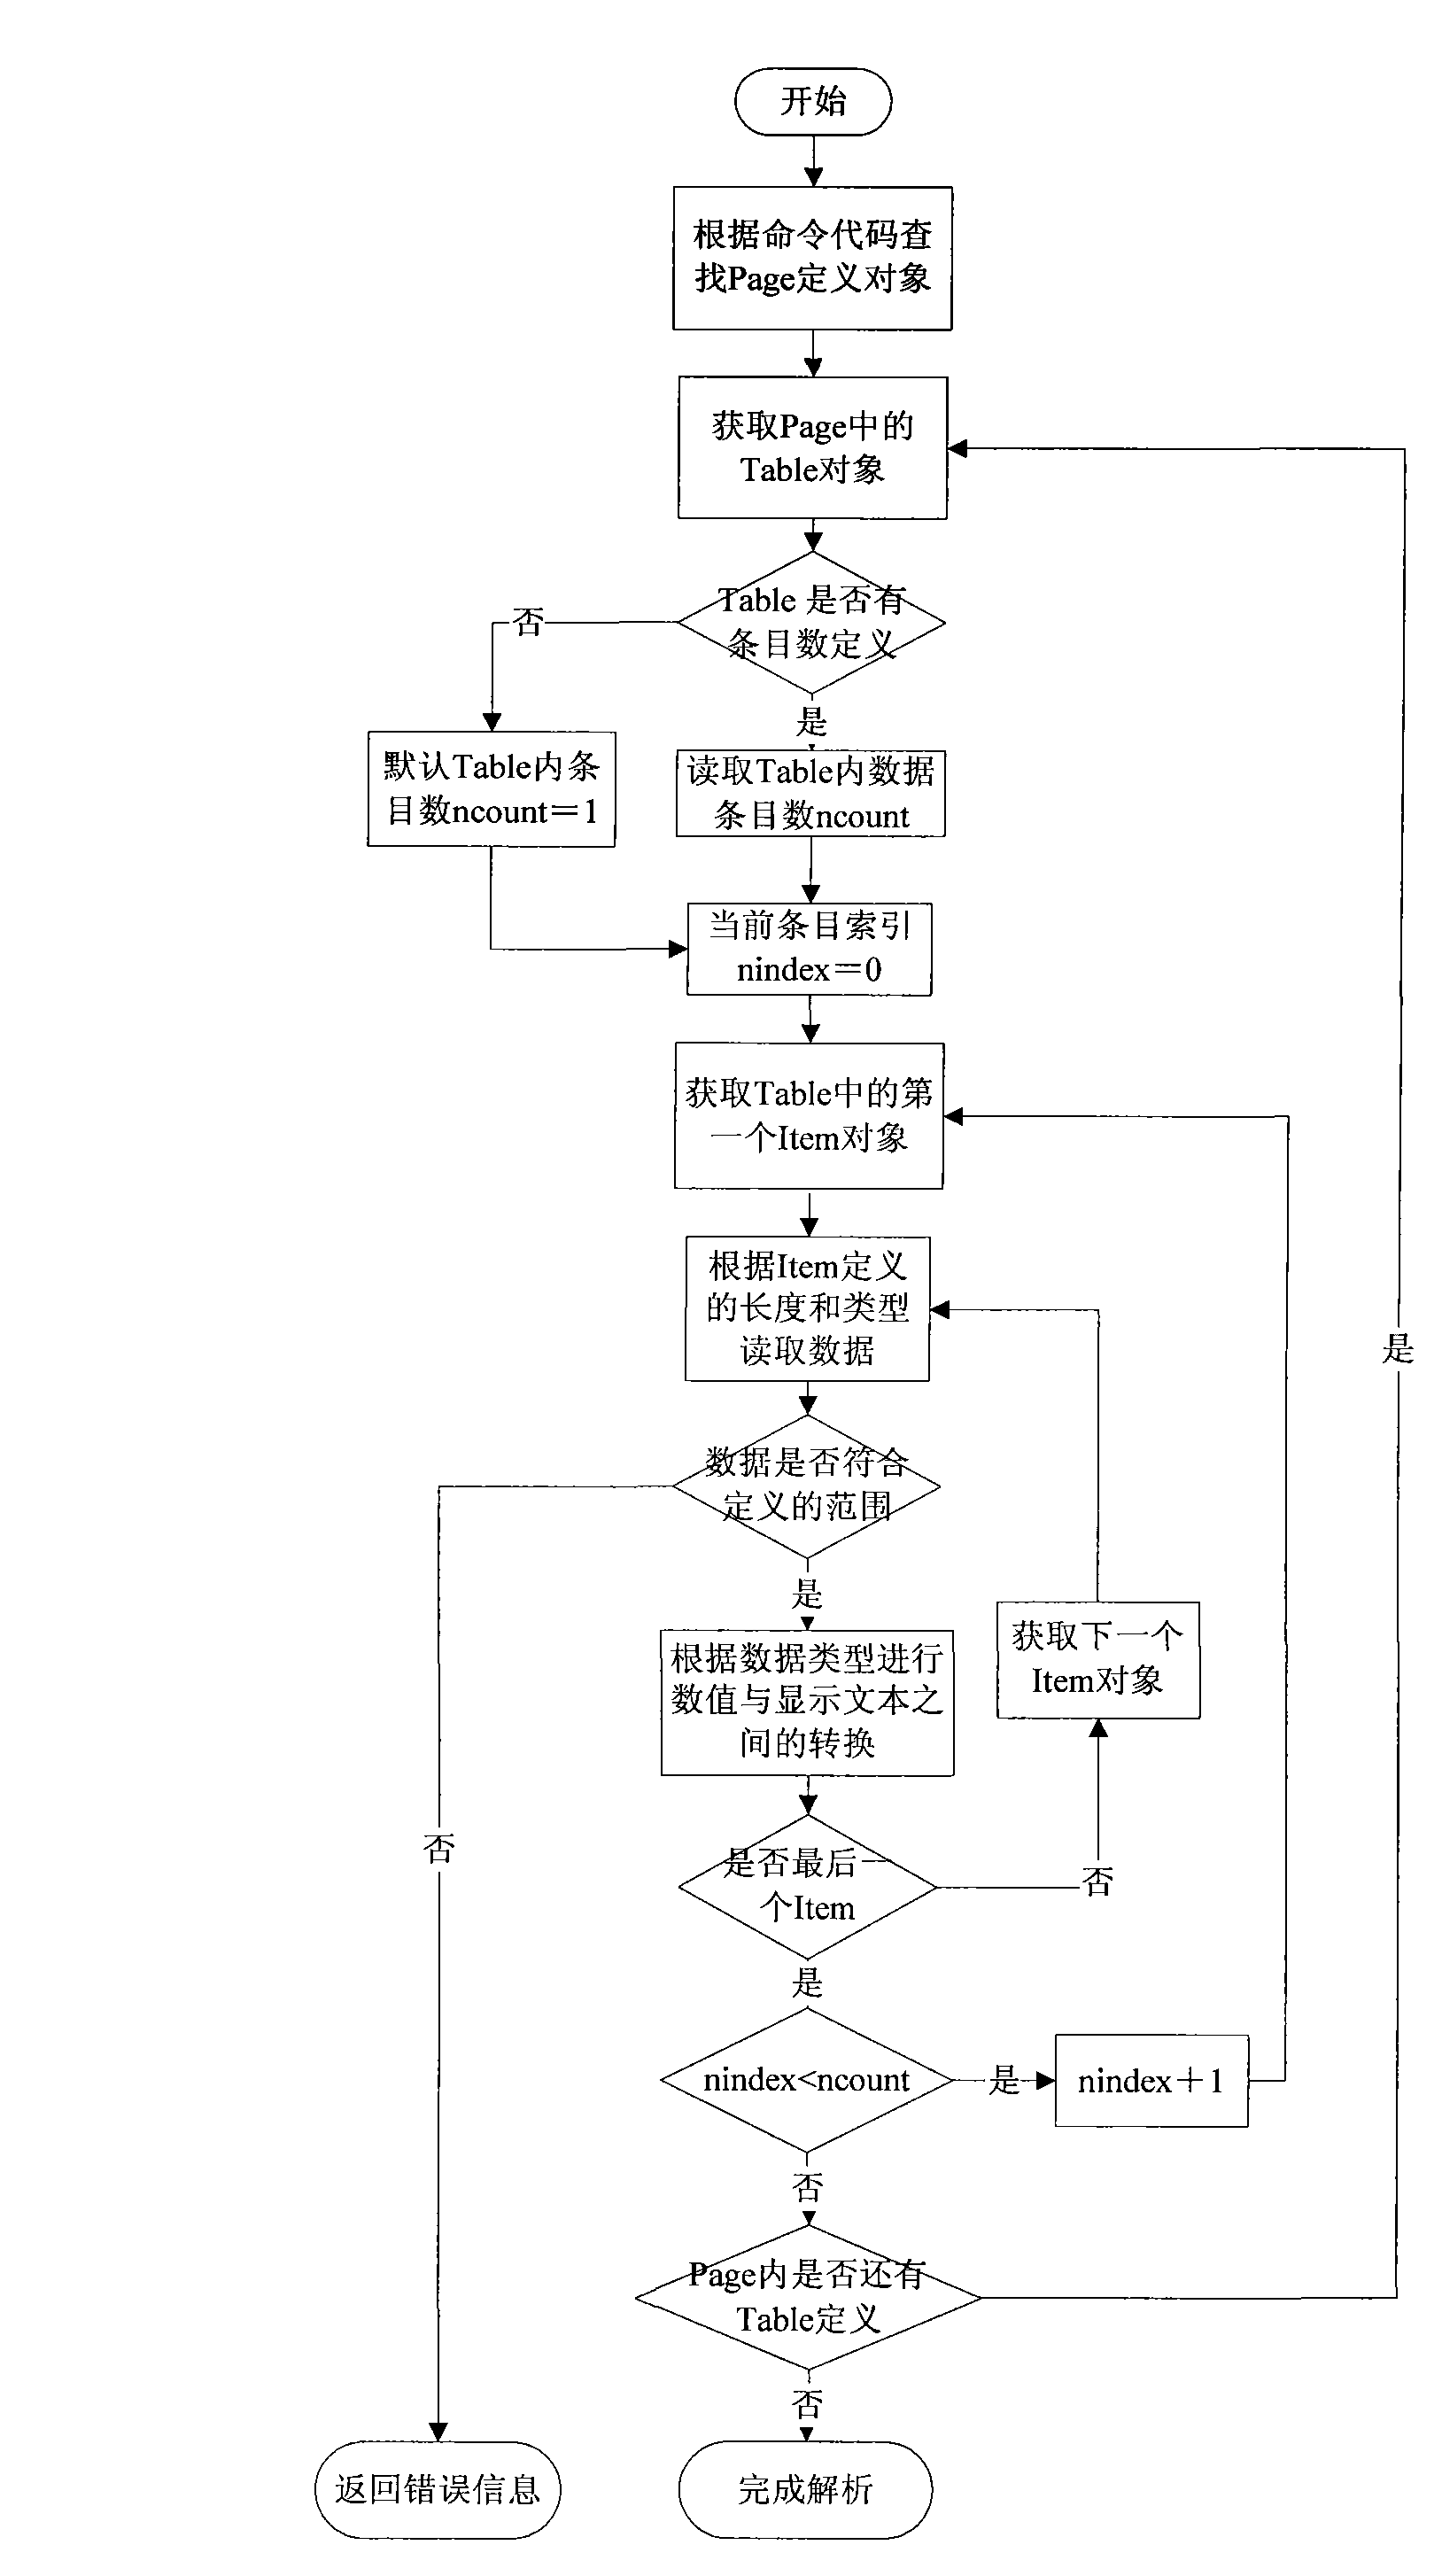 Script-based method for implementing service configuration